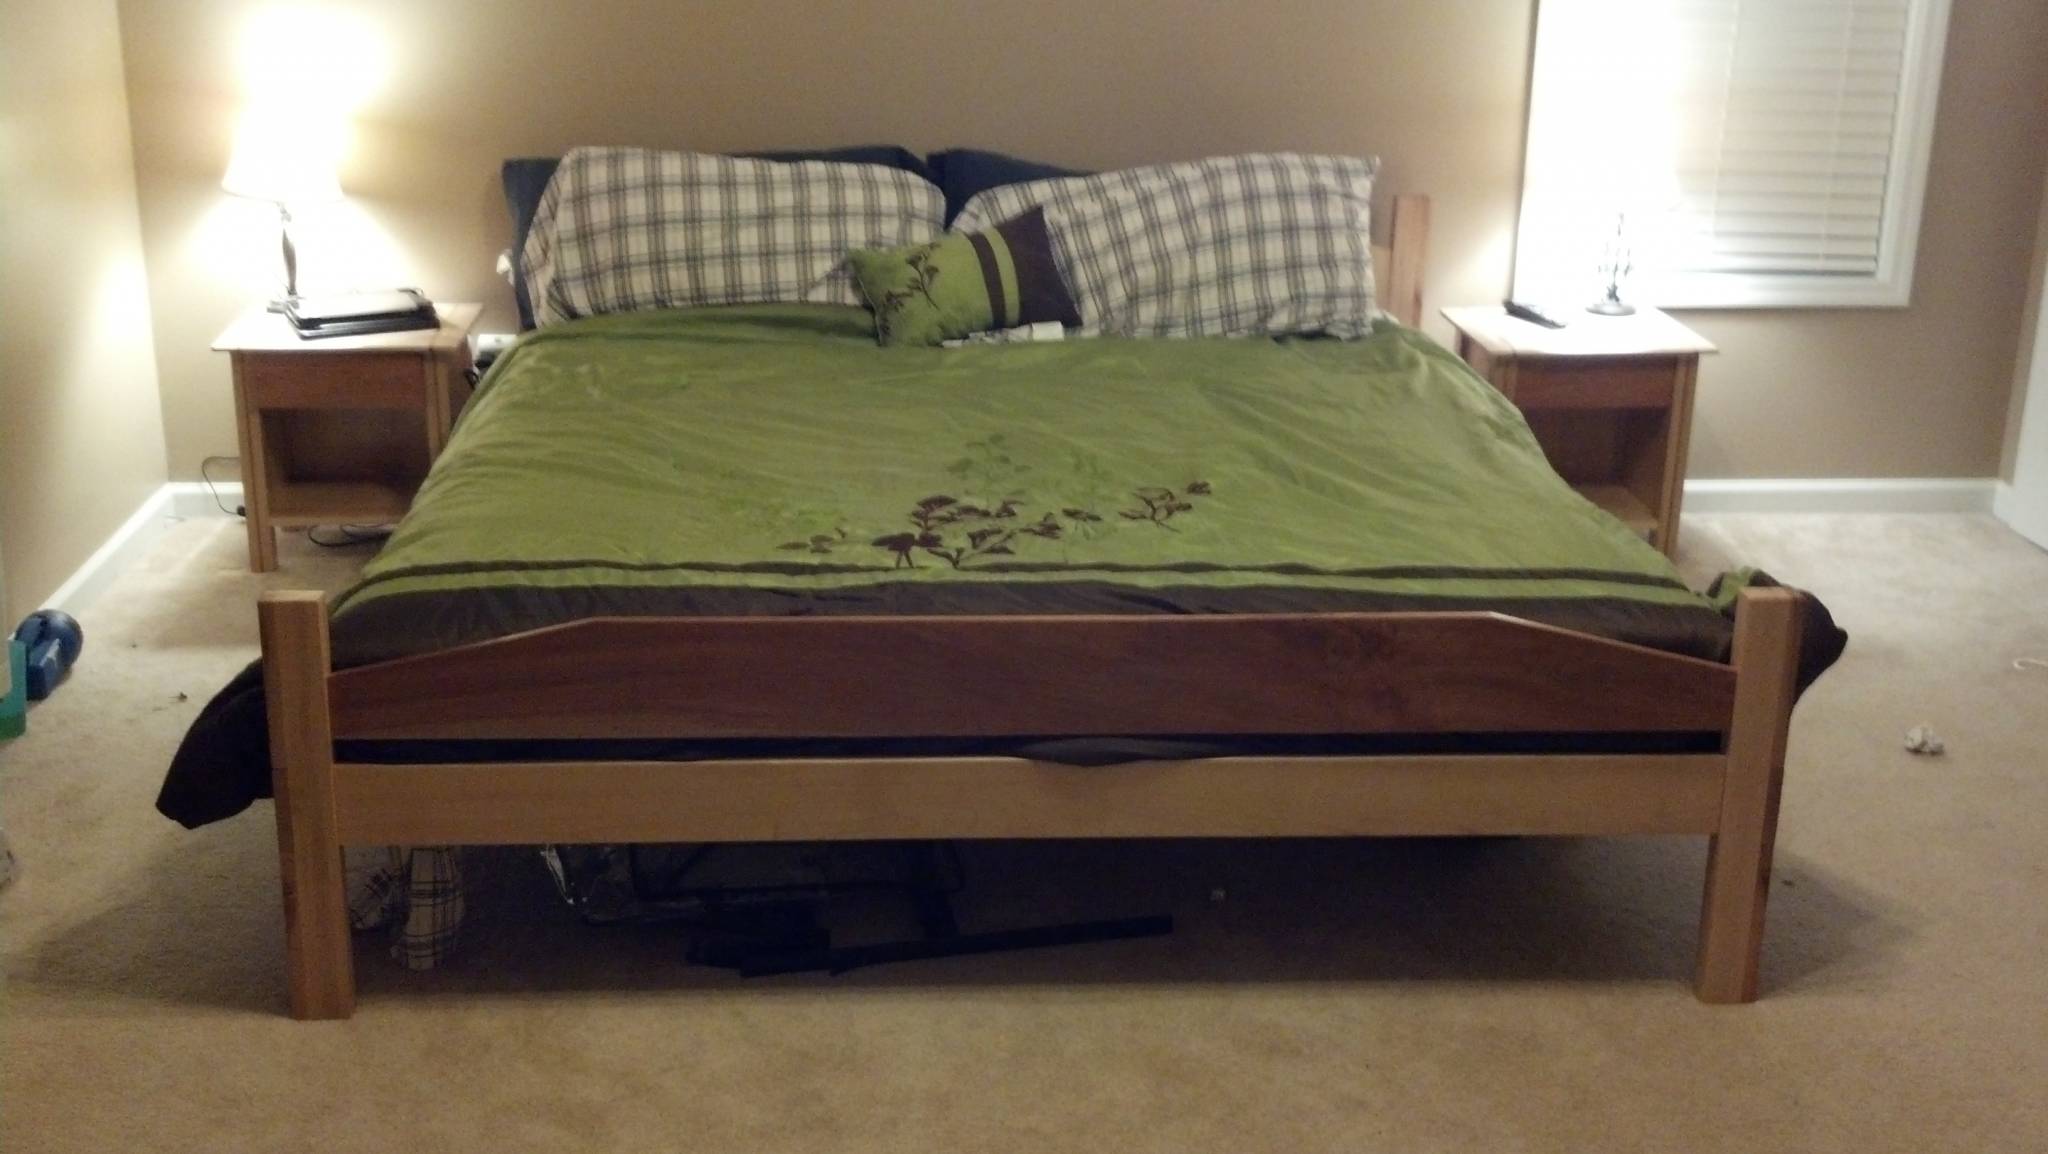 Bed and Nightstands